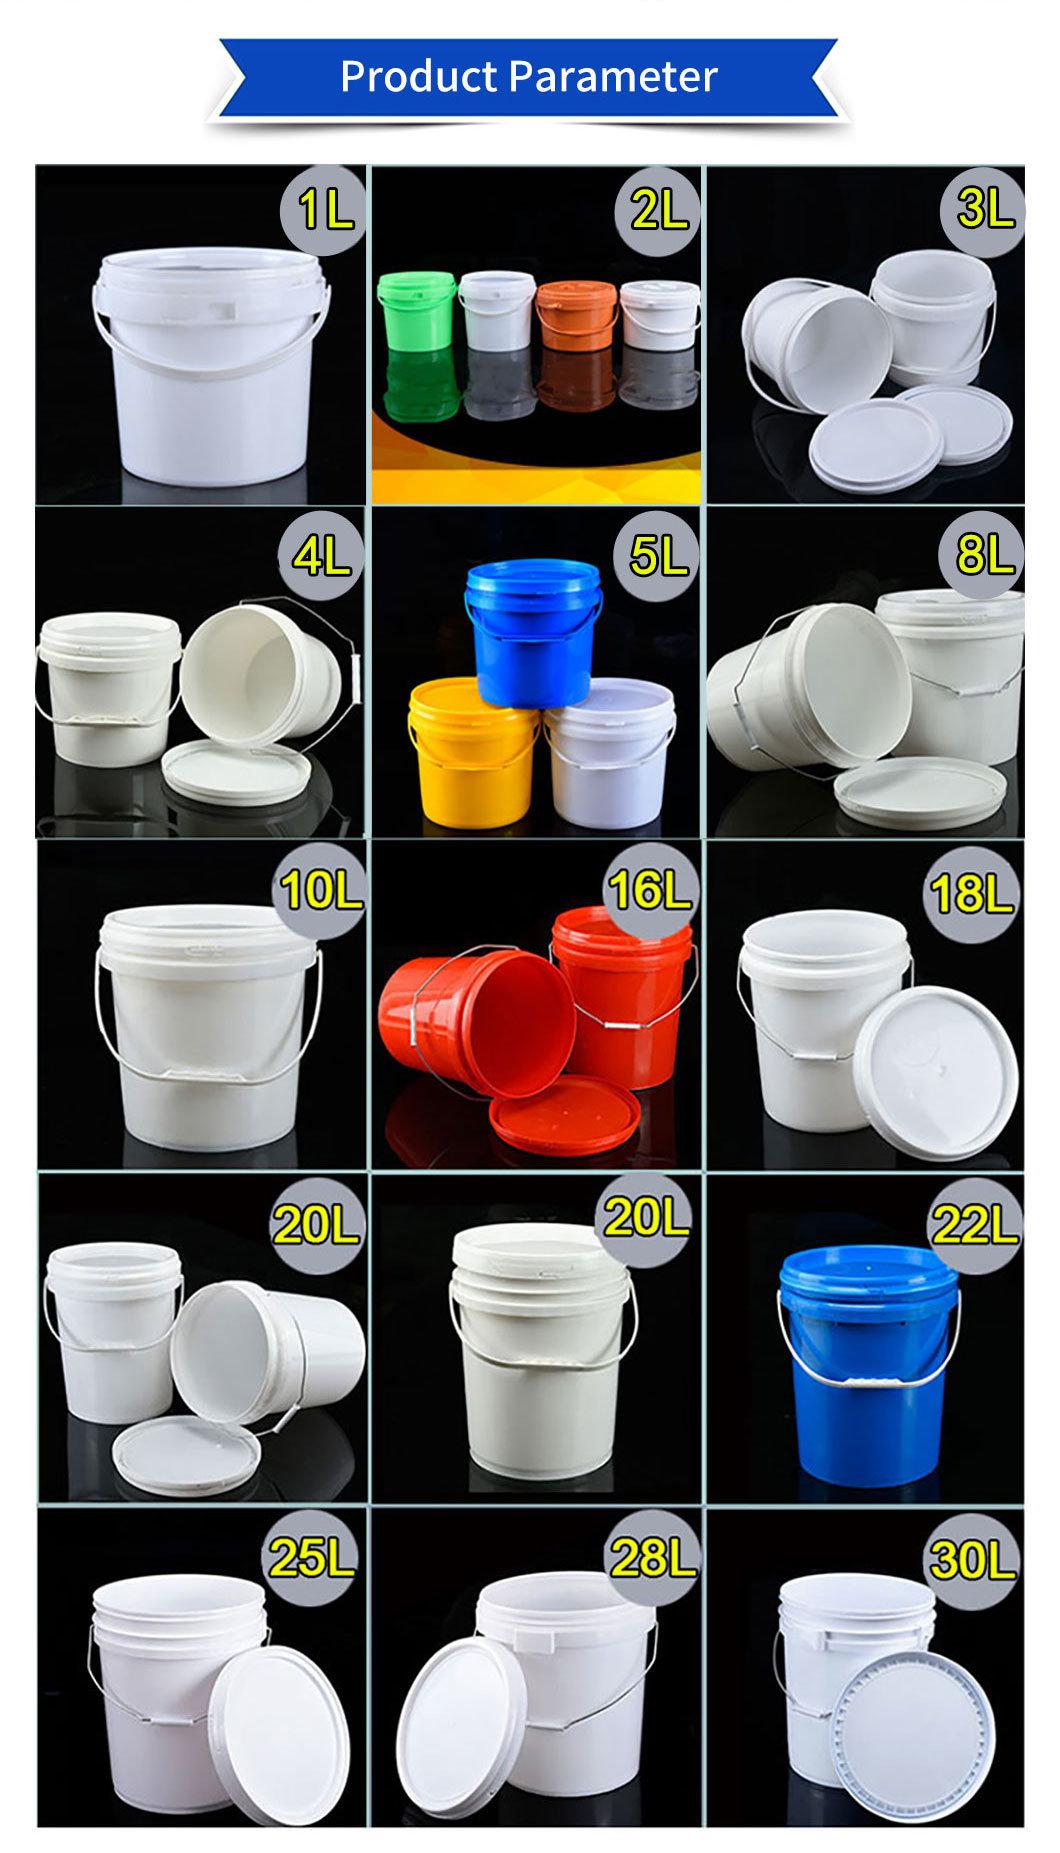 5 Gal High Density Polyethylene Round Plastic Pail White Color with Plastic/ Metal Handle